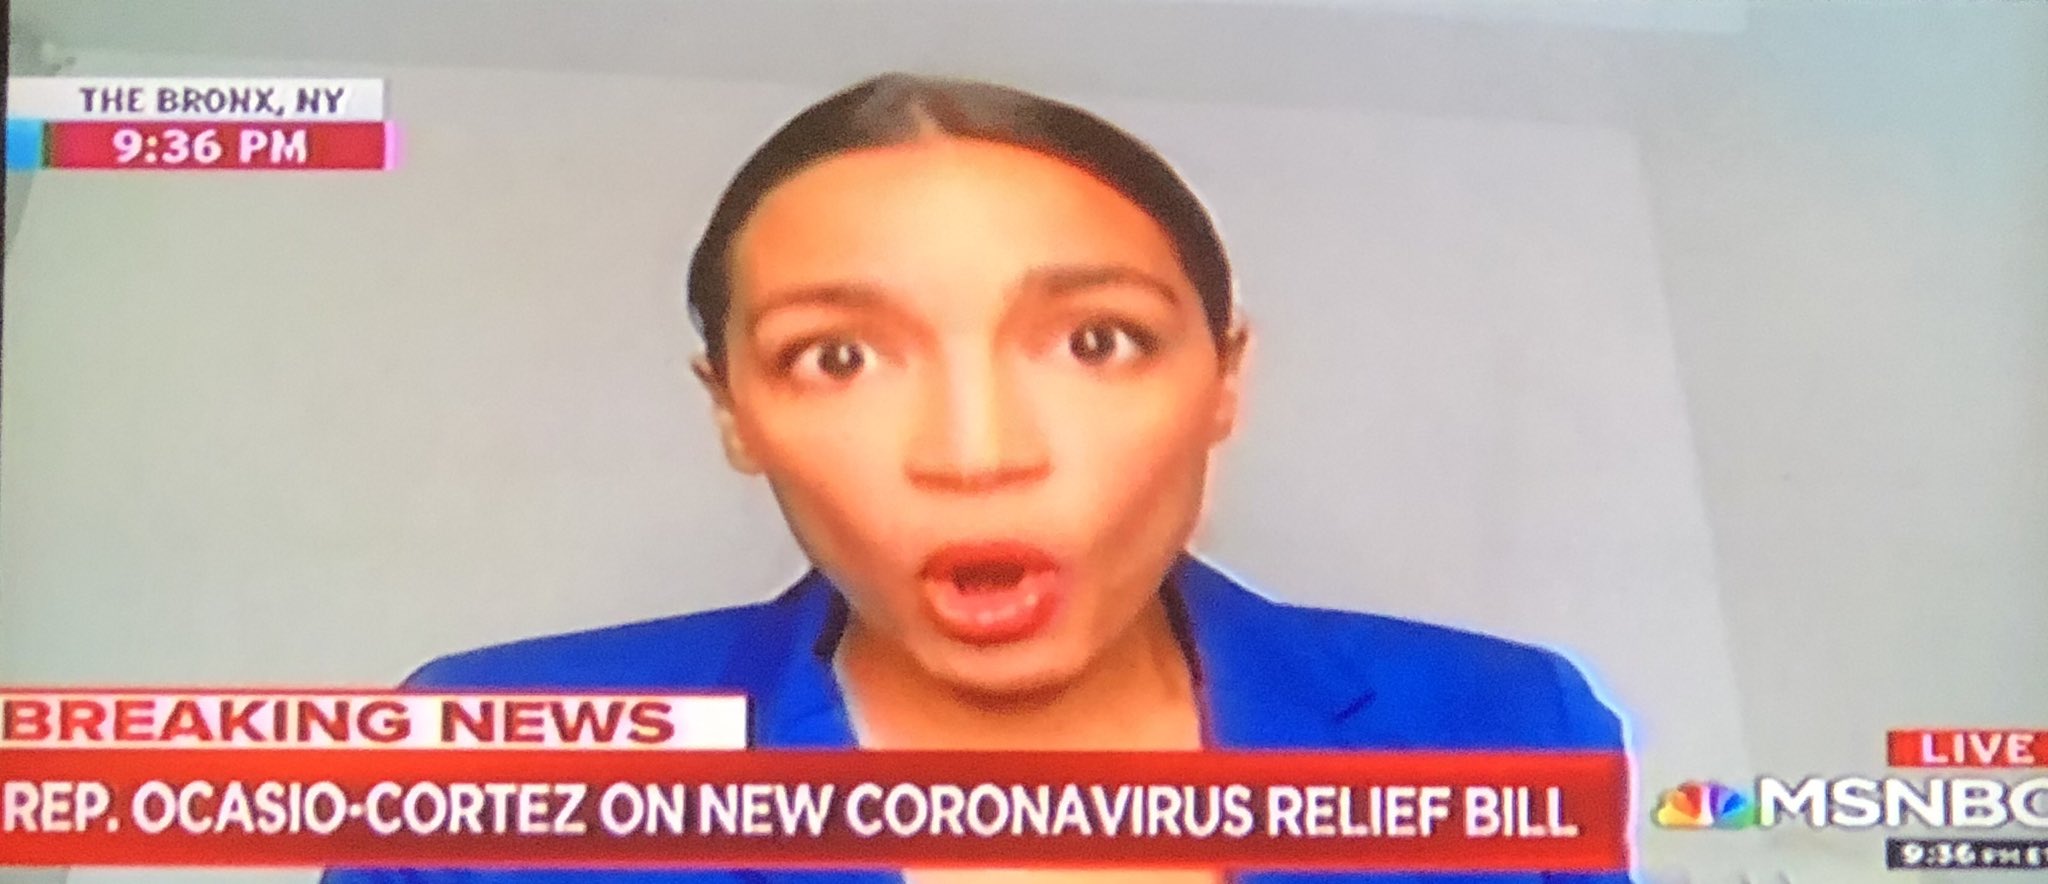 Ocasio-Cortez is now claiming that 